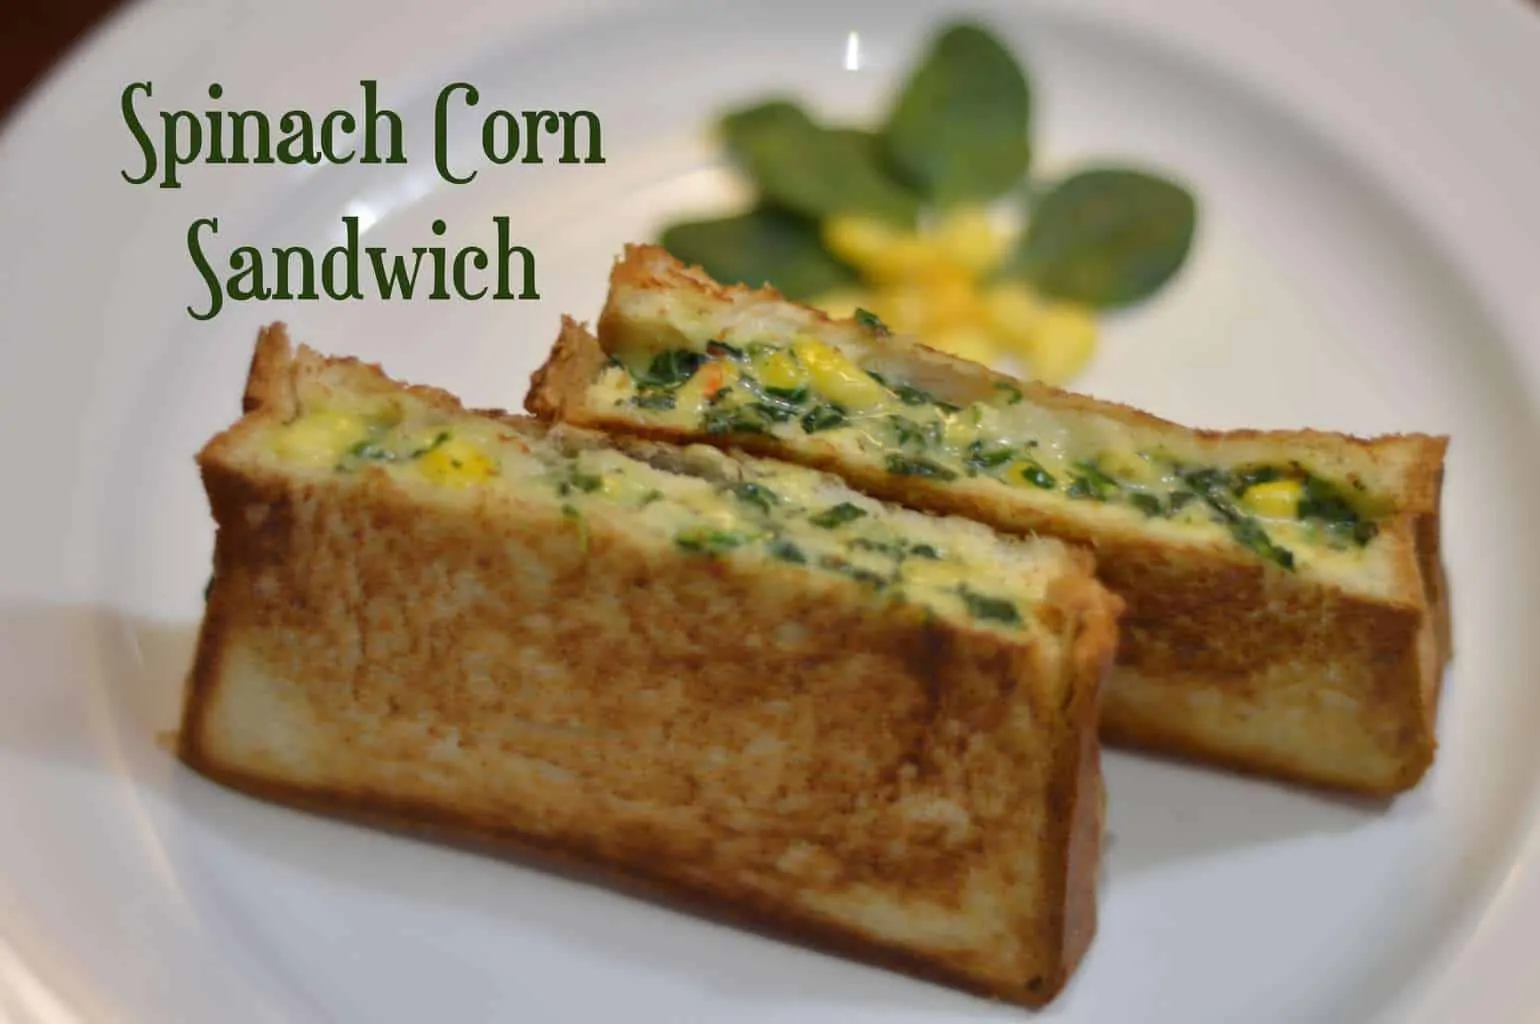 spinach corn sandwich cut into rectangle shape served in a plate